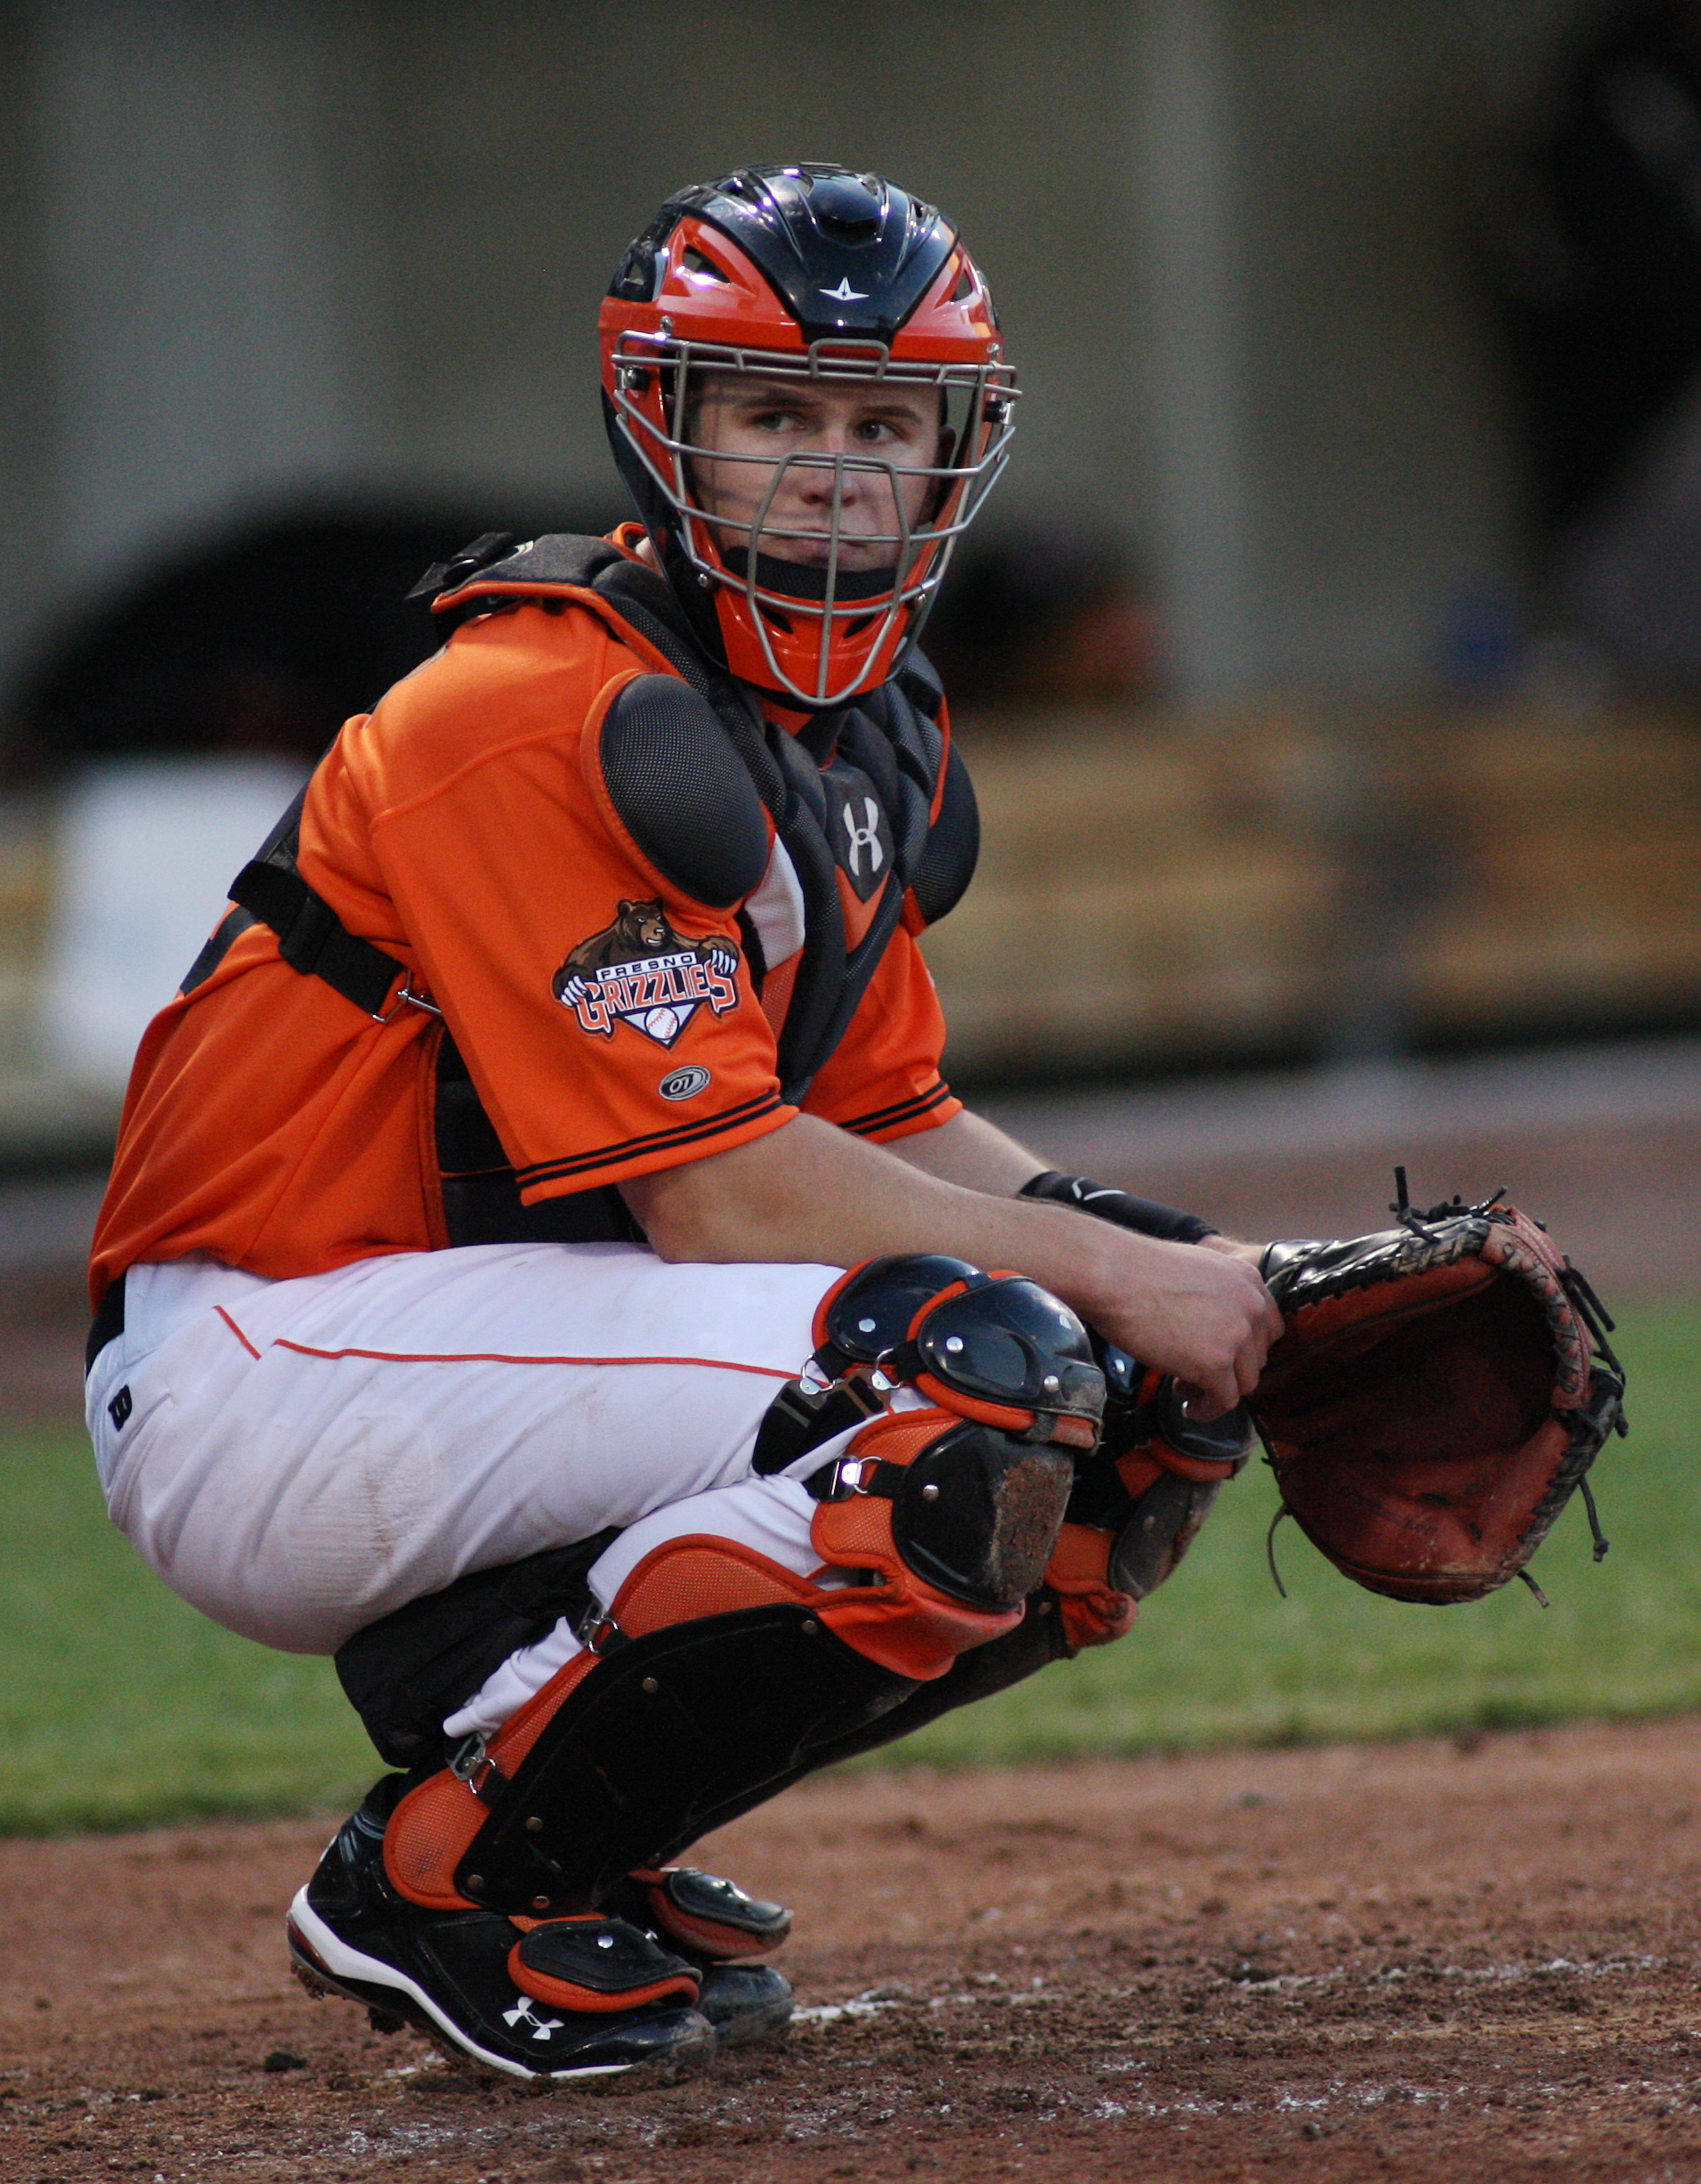 Buster Posey Catching For The Fresno Grizzlies In April Of